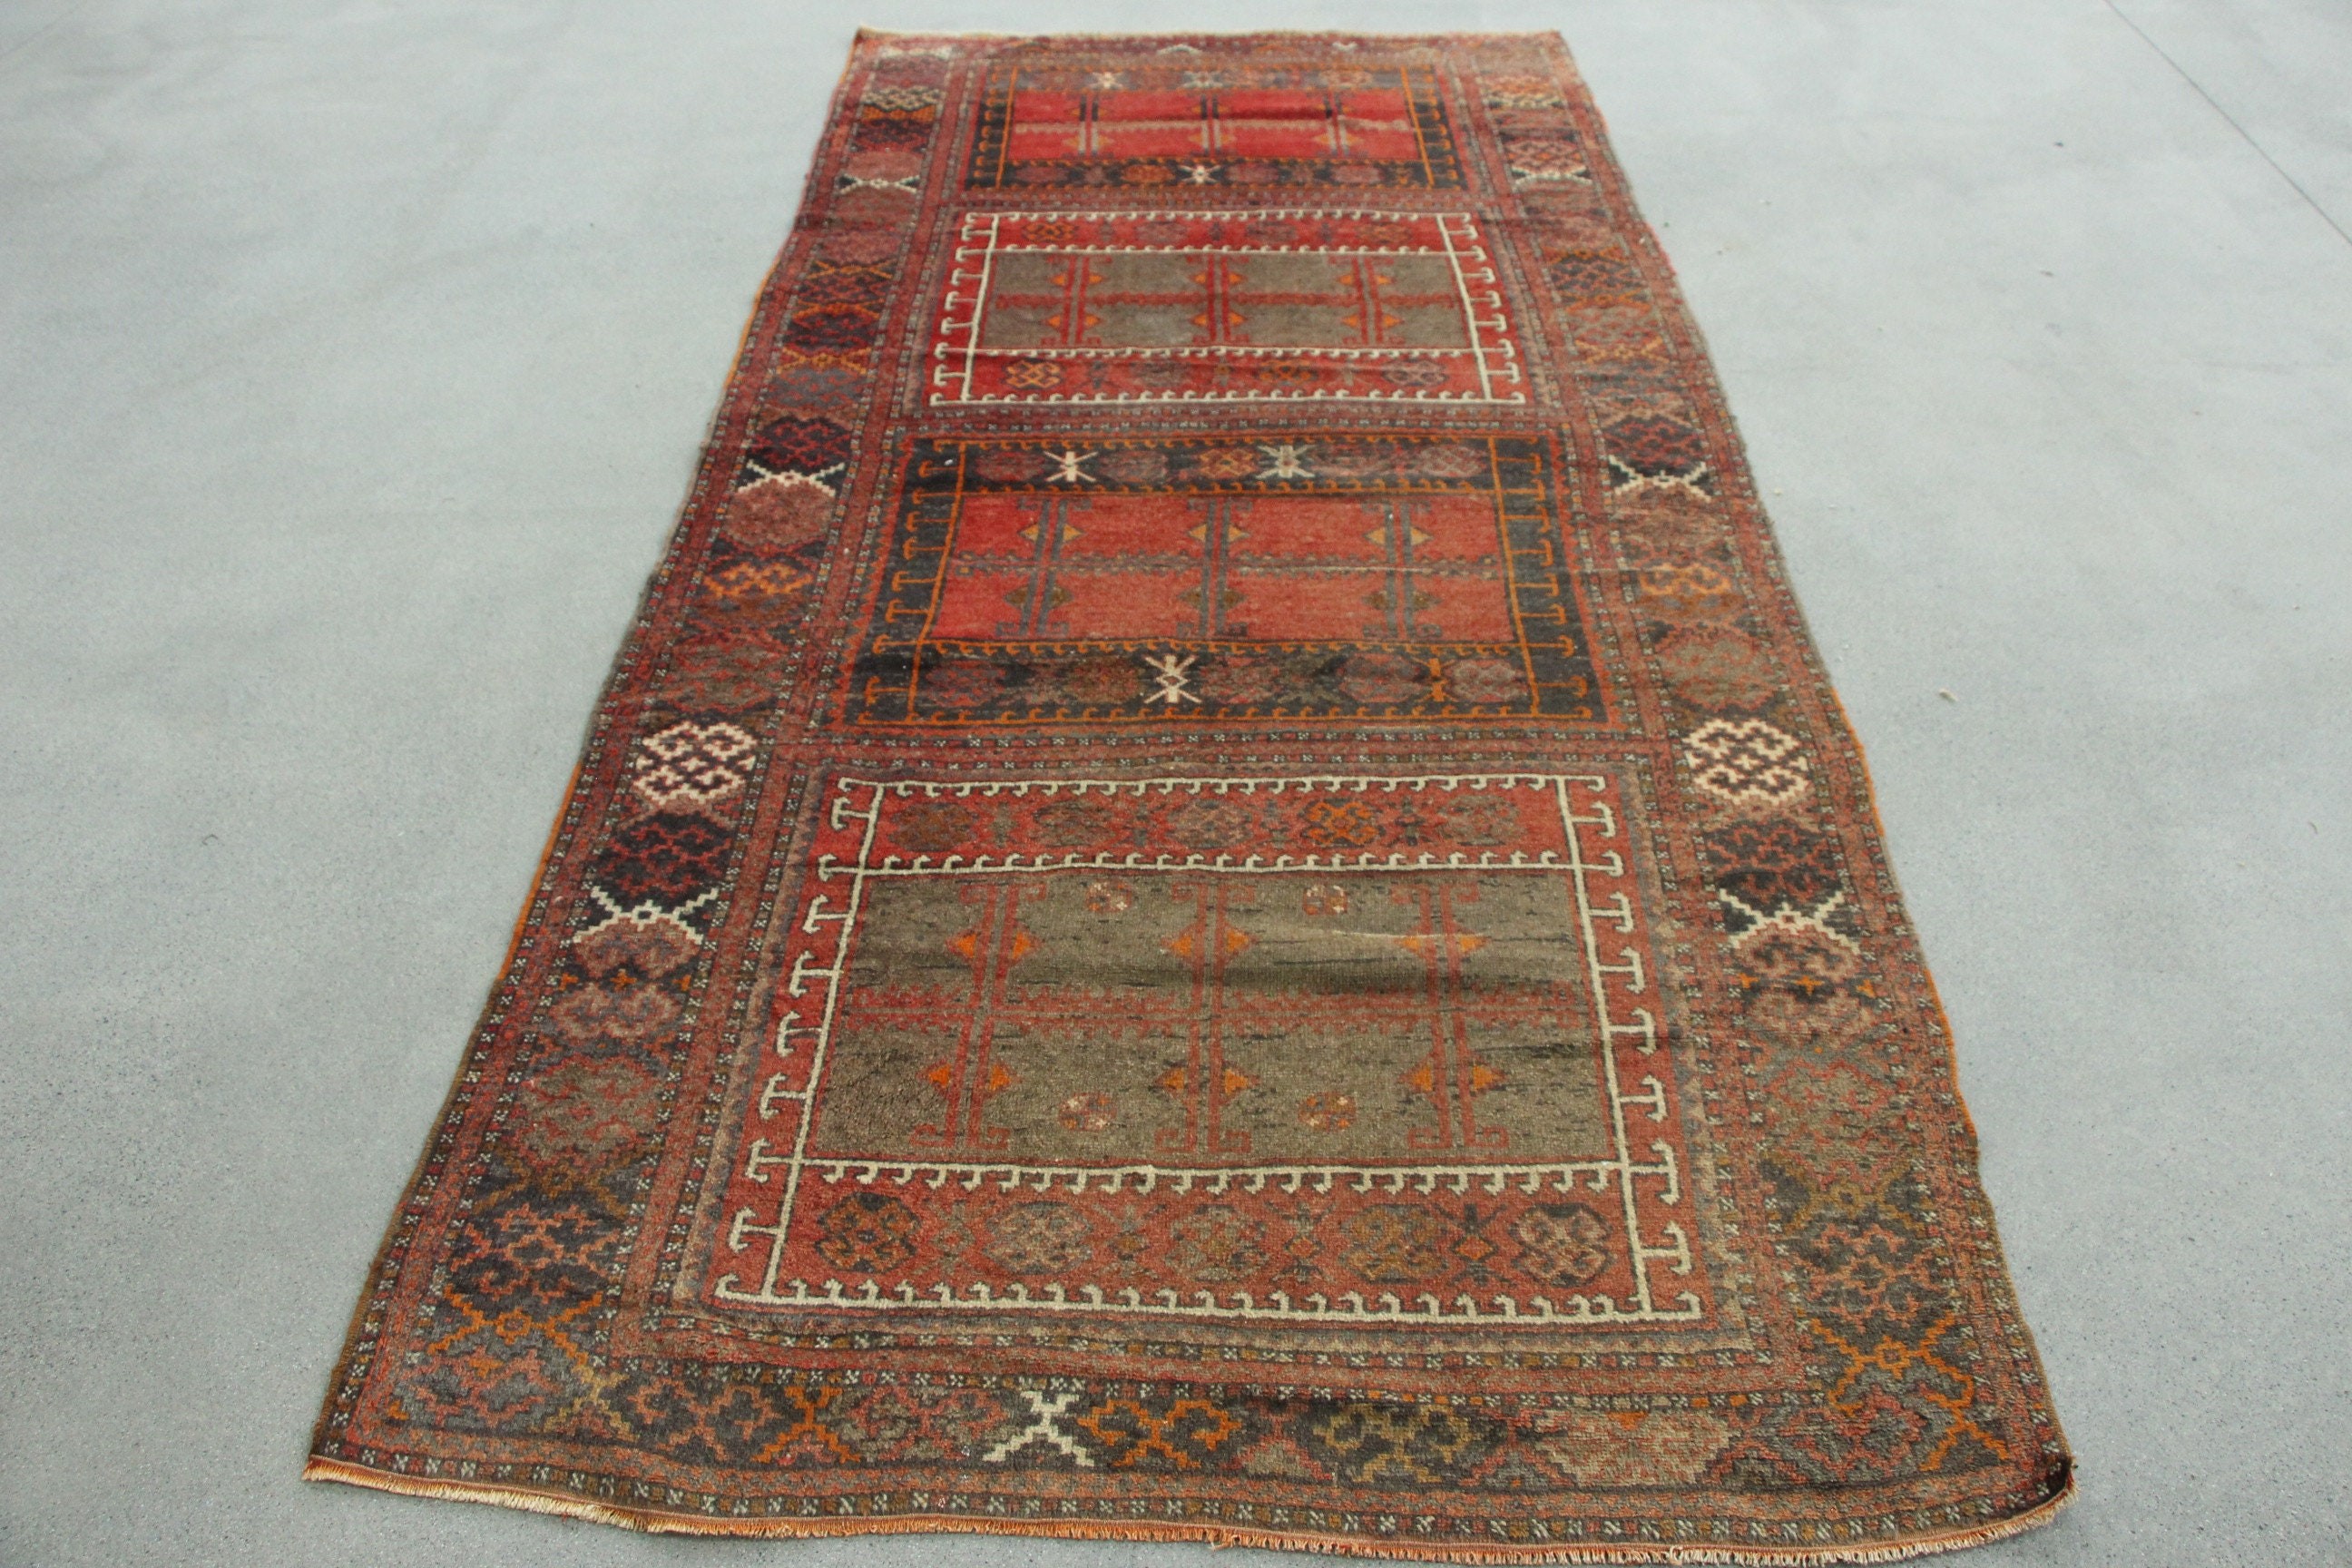 Red Kitchen Rug, Home Decor Rug, Turkish Rug, Anatolian Rugs, Salon Rug, 4.3x9.4 ft Large Rugs, Dining Room Rugs, Cute Rug, Vintage Rugs